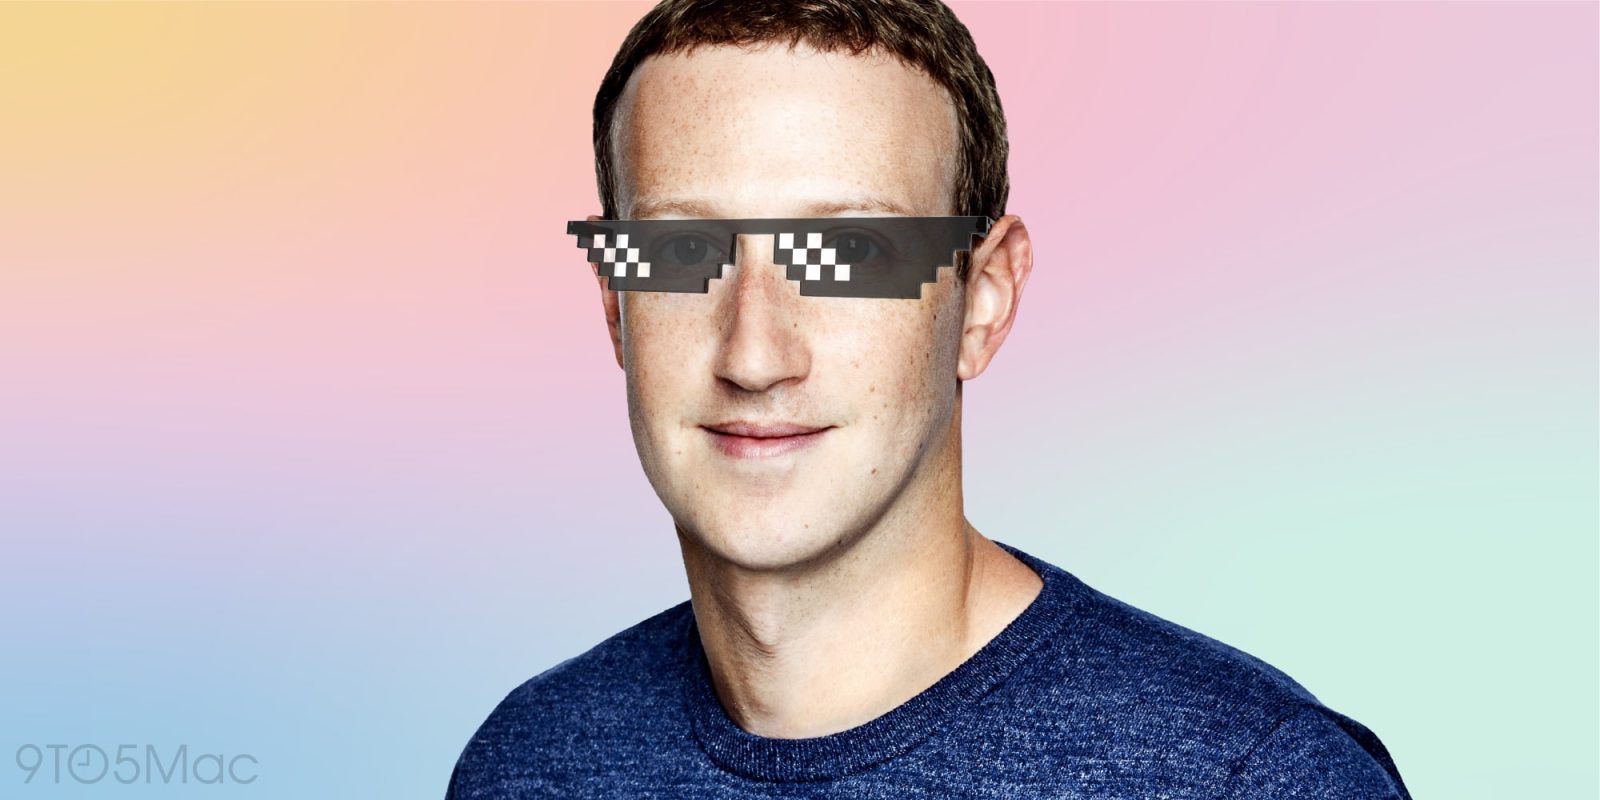 Meta Glasses expected to be revealed in the fall | Mark Zuckerberg wearing "Deal With It" meme sunglasses.